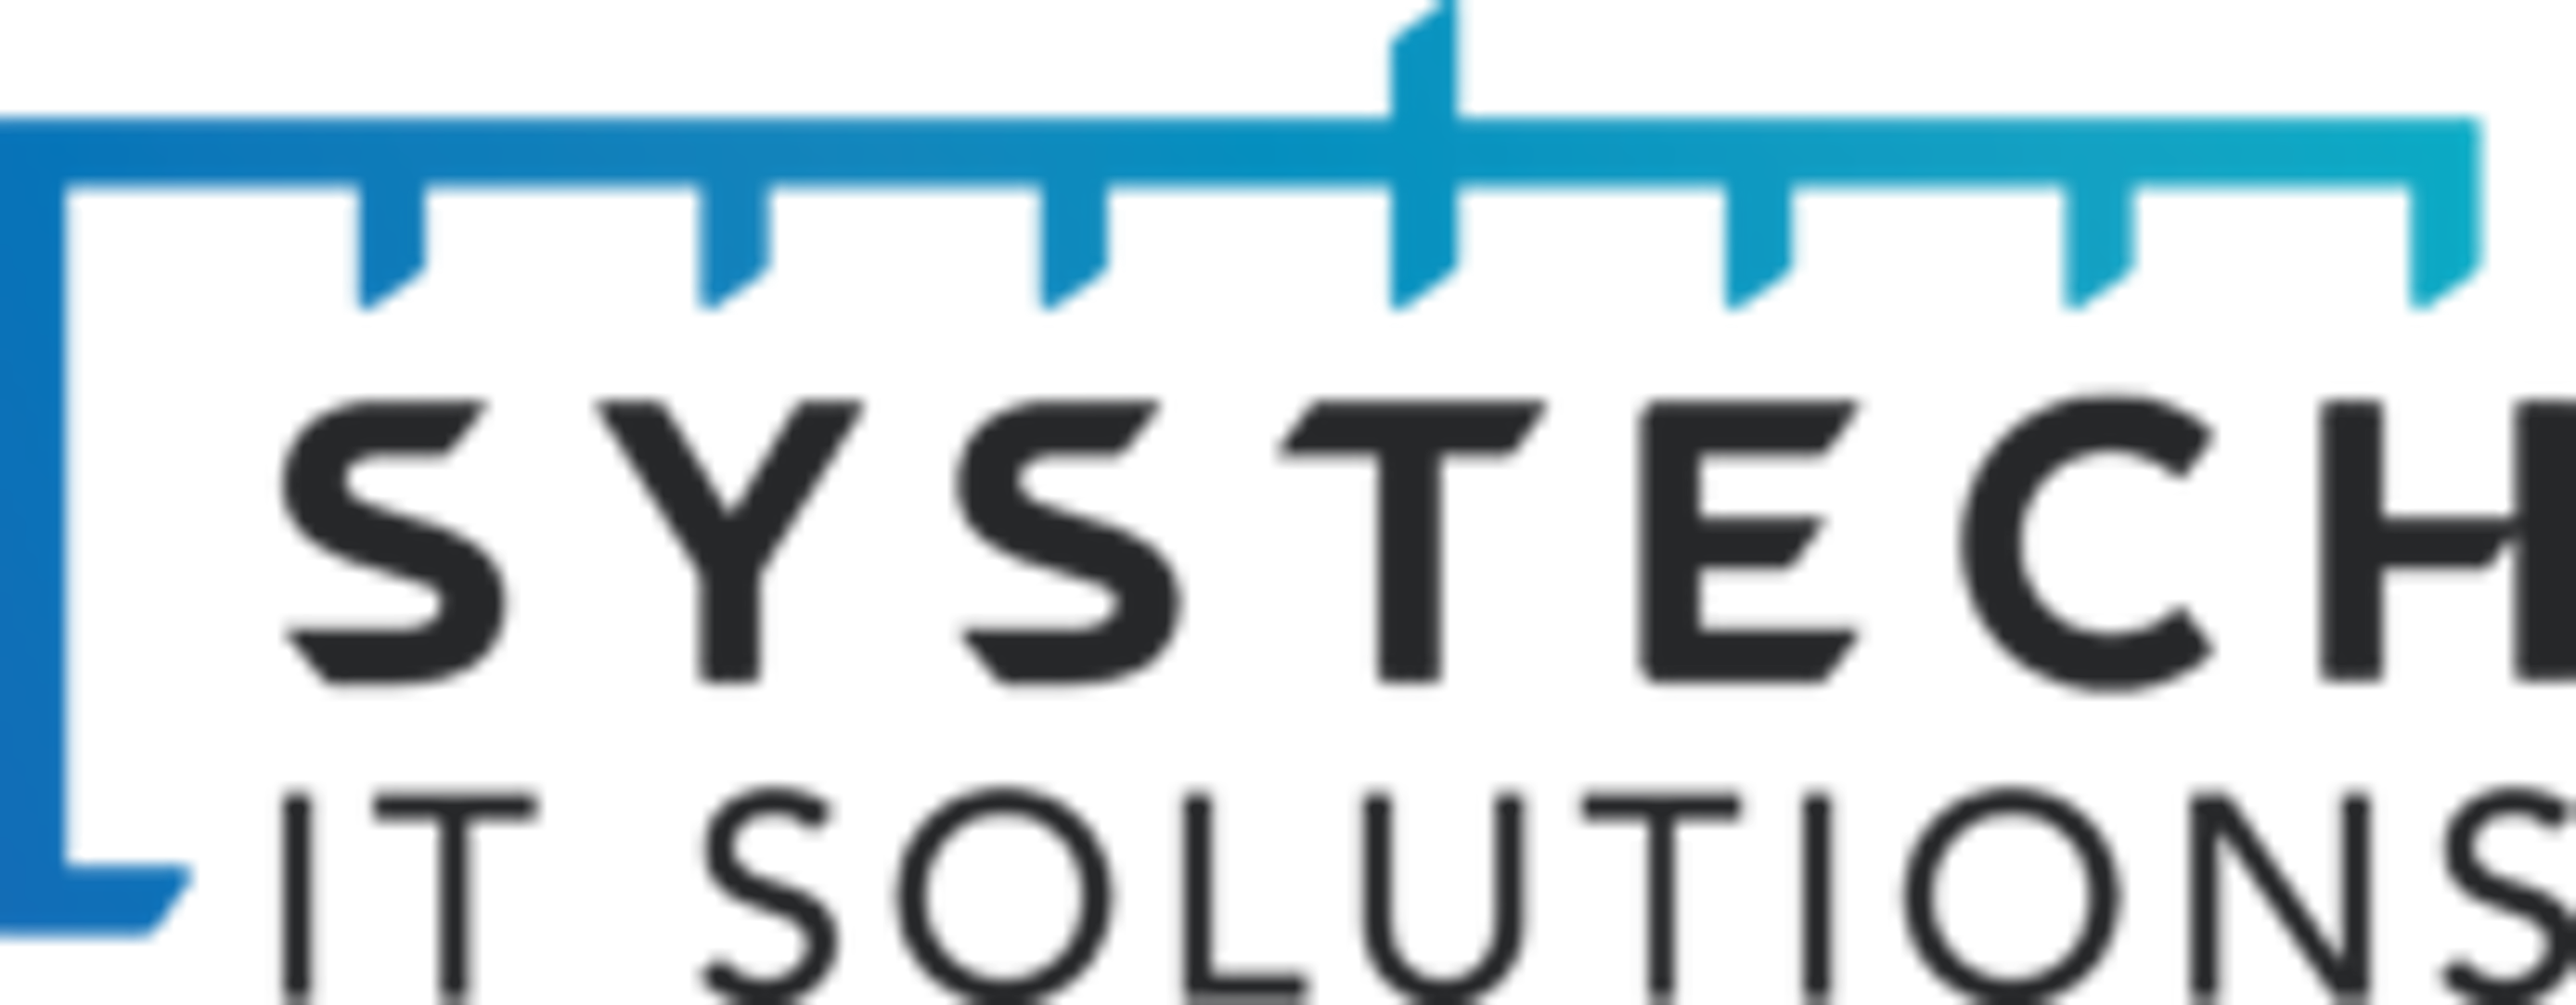 Systechitsolutions.co.uk